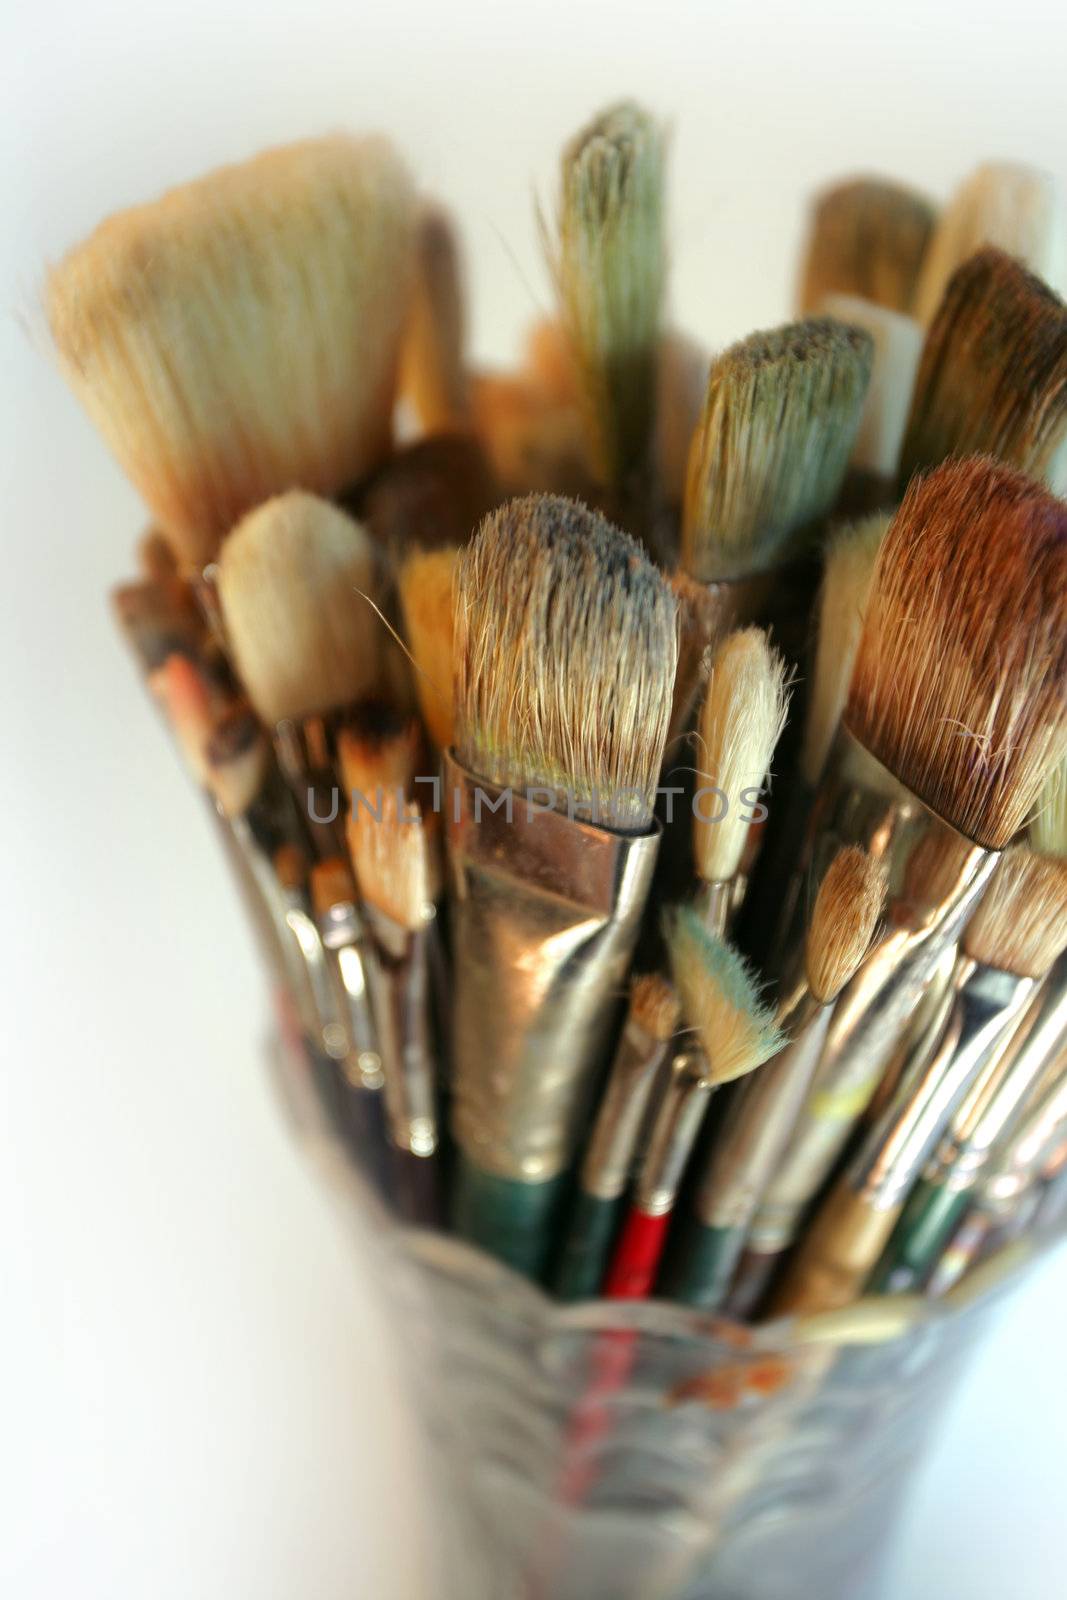 A very shallow depth-of-field image of used paintbrushes stacked in a glass vase. Focus is on the front brushes.
